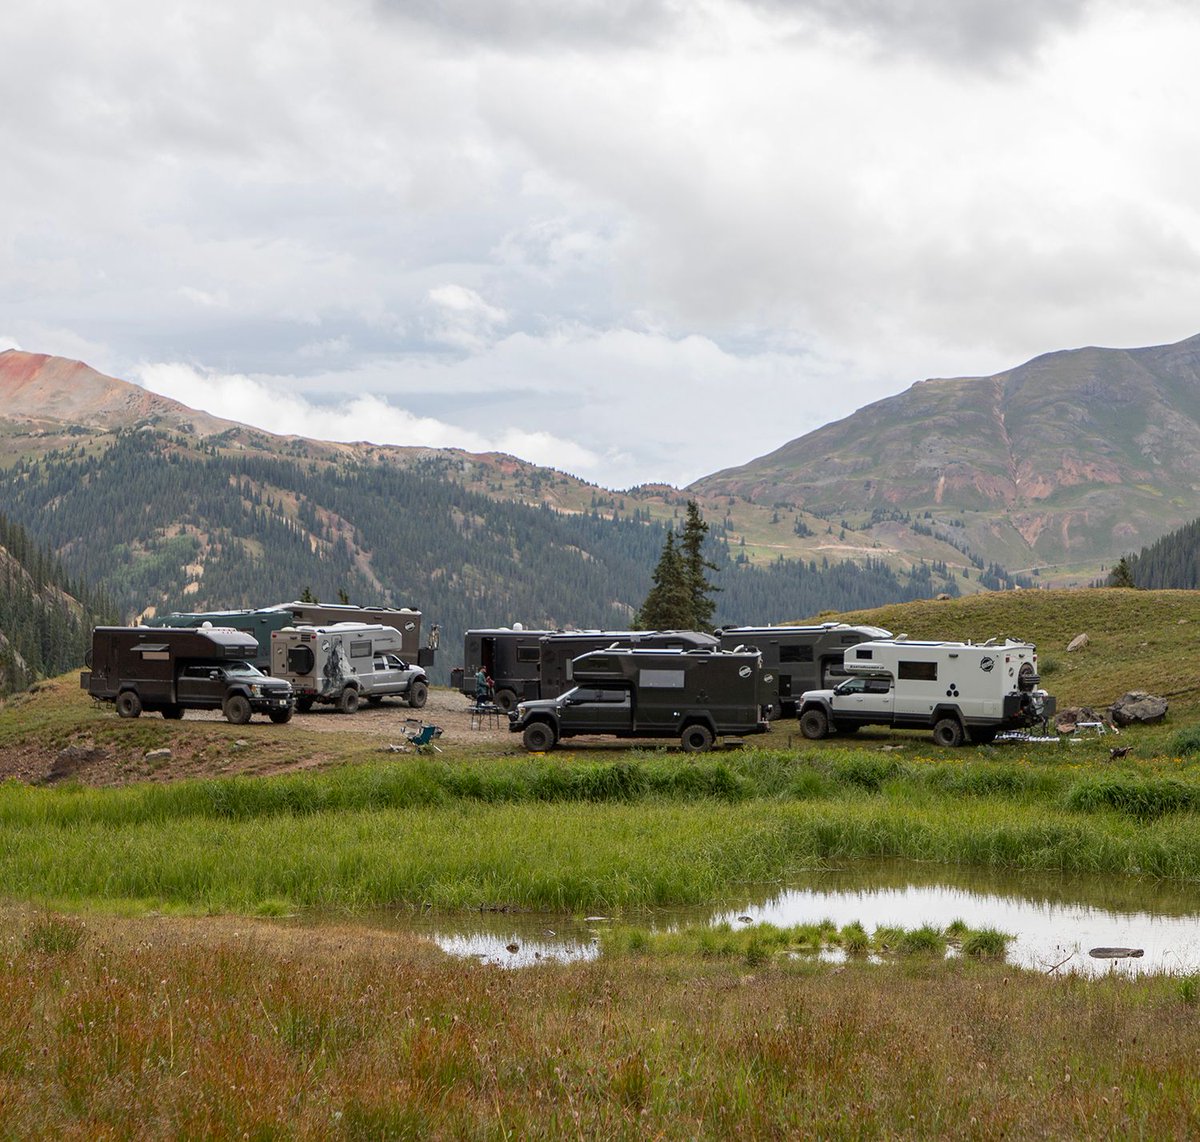 Sometimes you just have to park it and take in the view.

#earthroamer #adventure #journey #roamtheearth #offroad #explore #camperlife #adventurelife #4x4camper